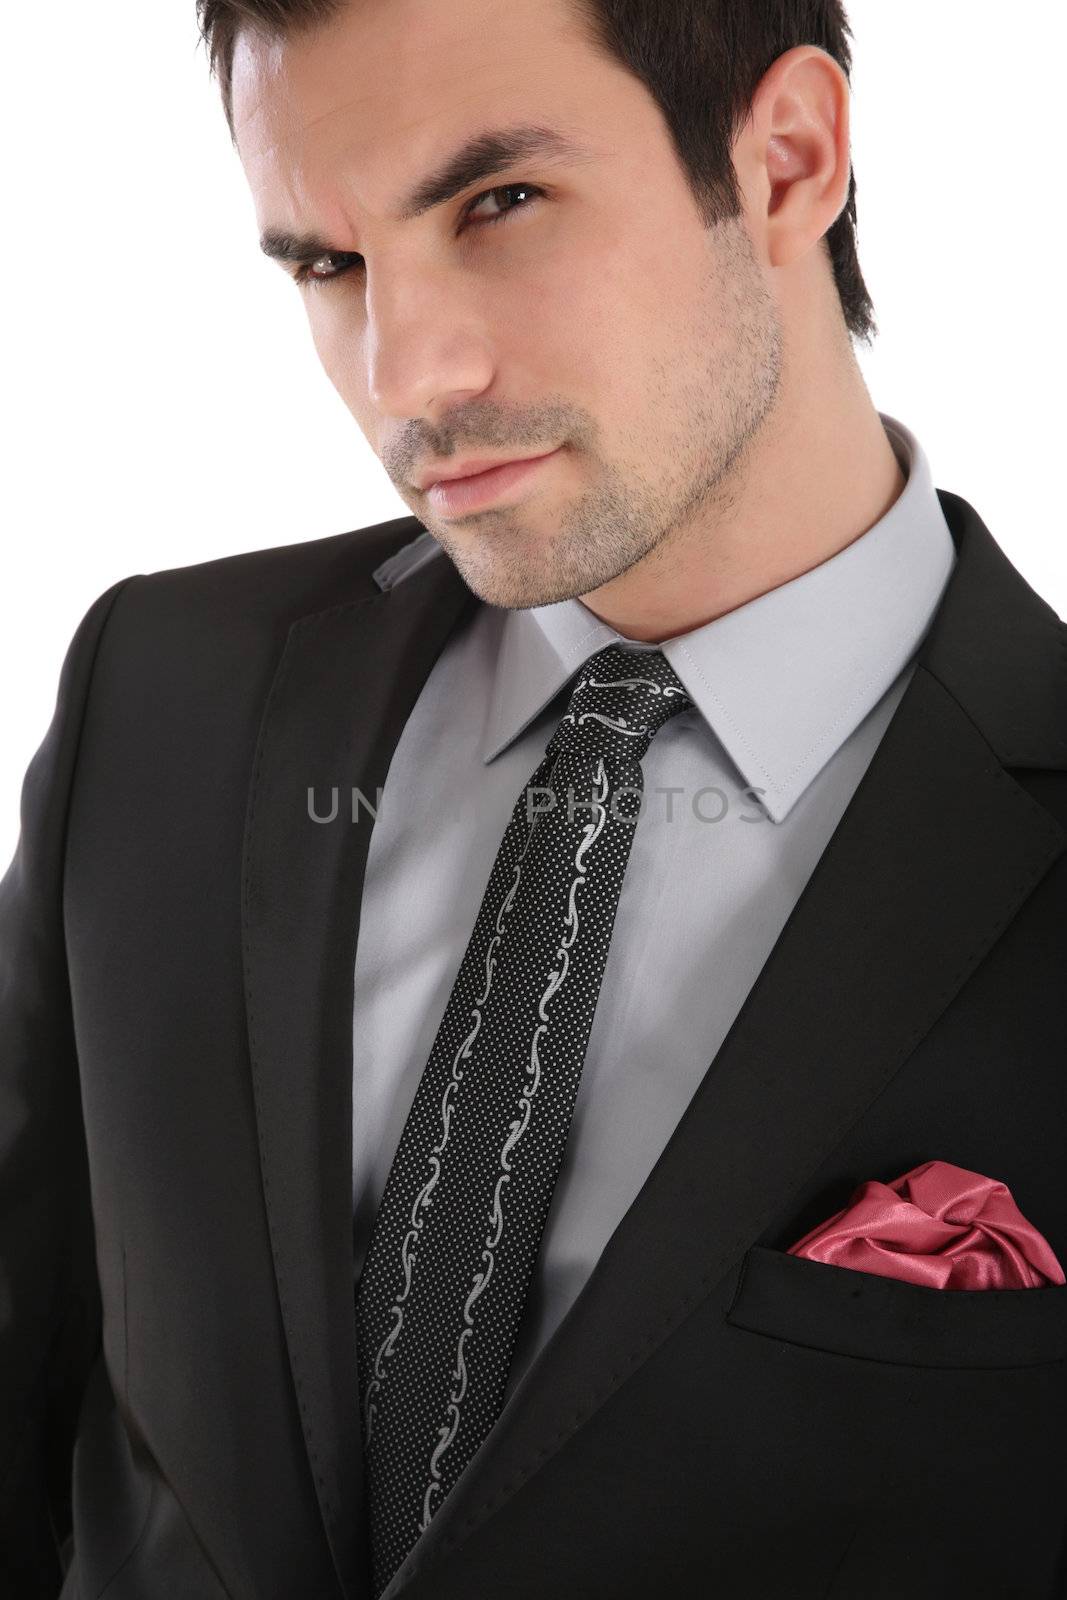 Elegant handsome man with a tie and red pocket handkerchief